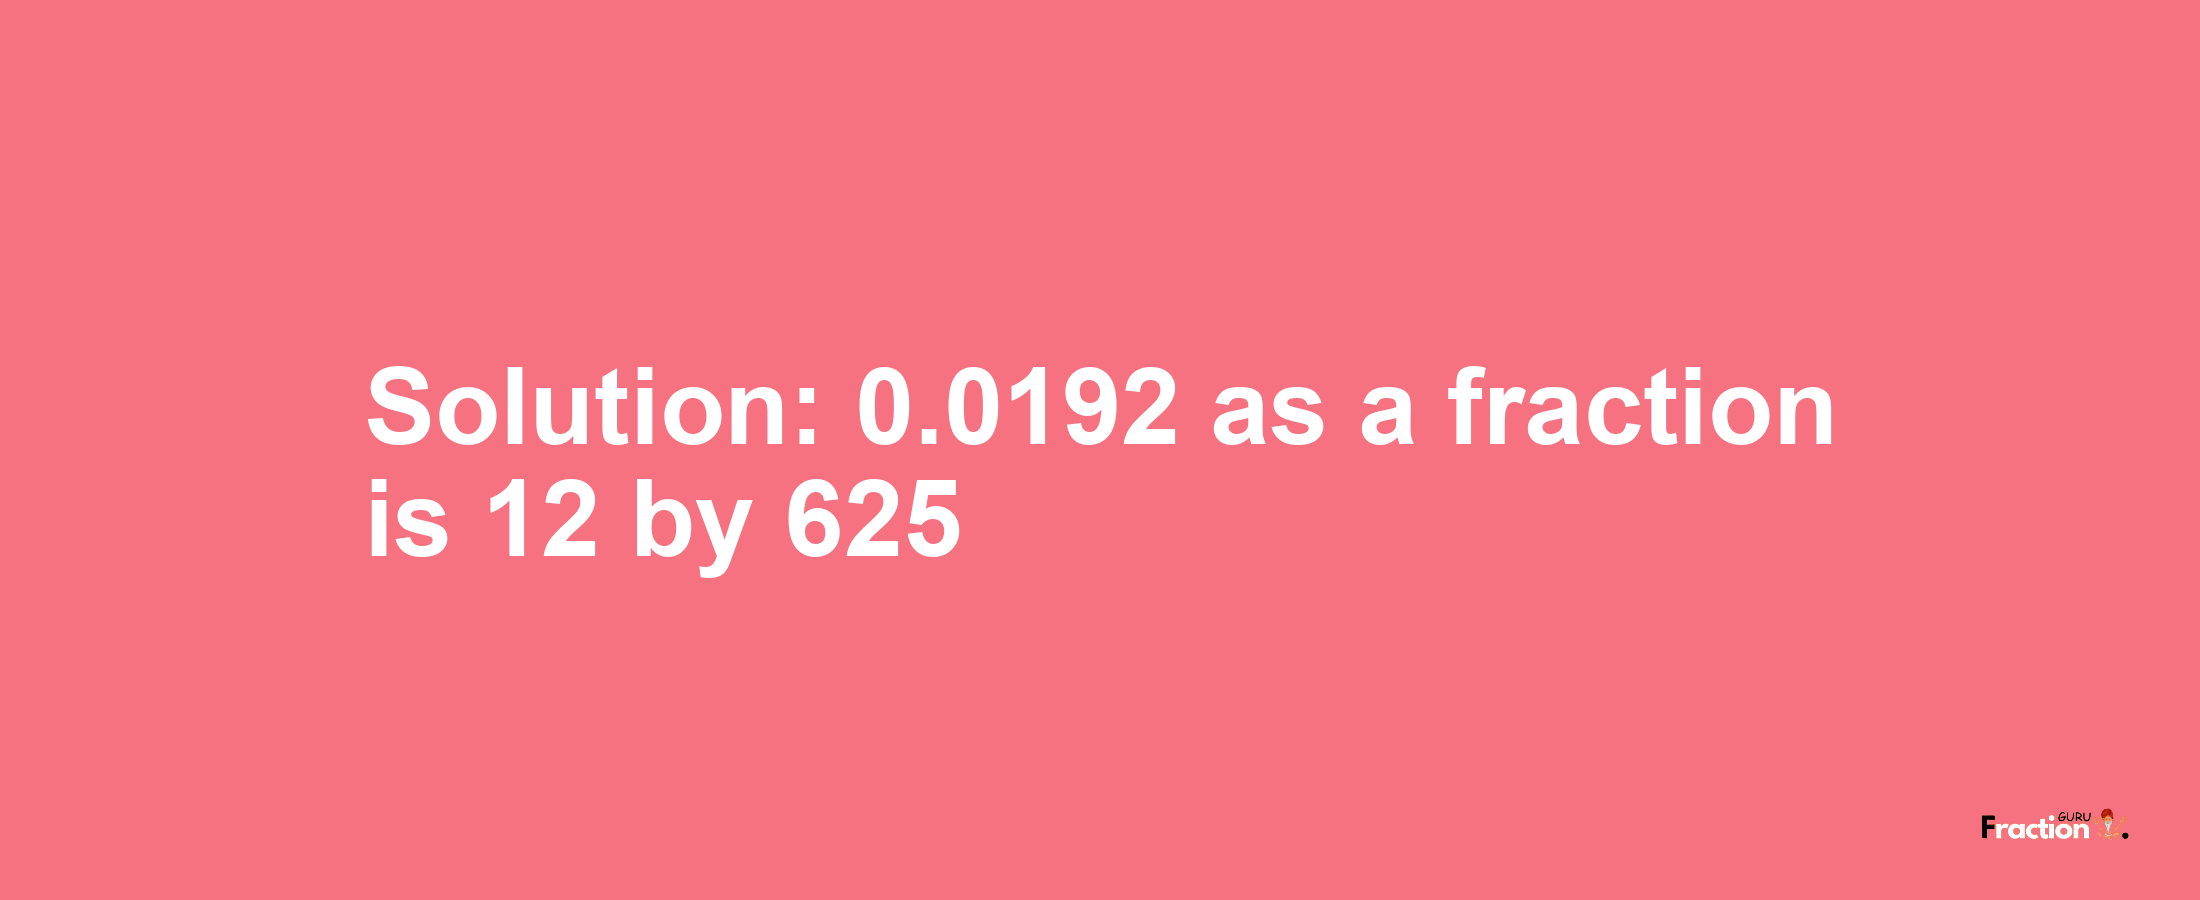 Solution:0.0192 as a fraction is 12/625